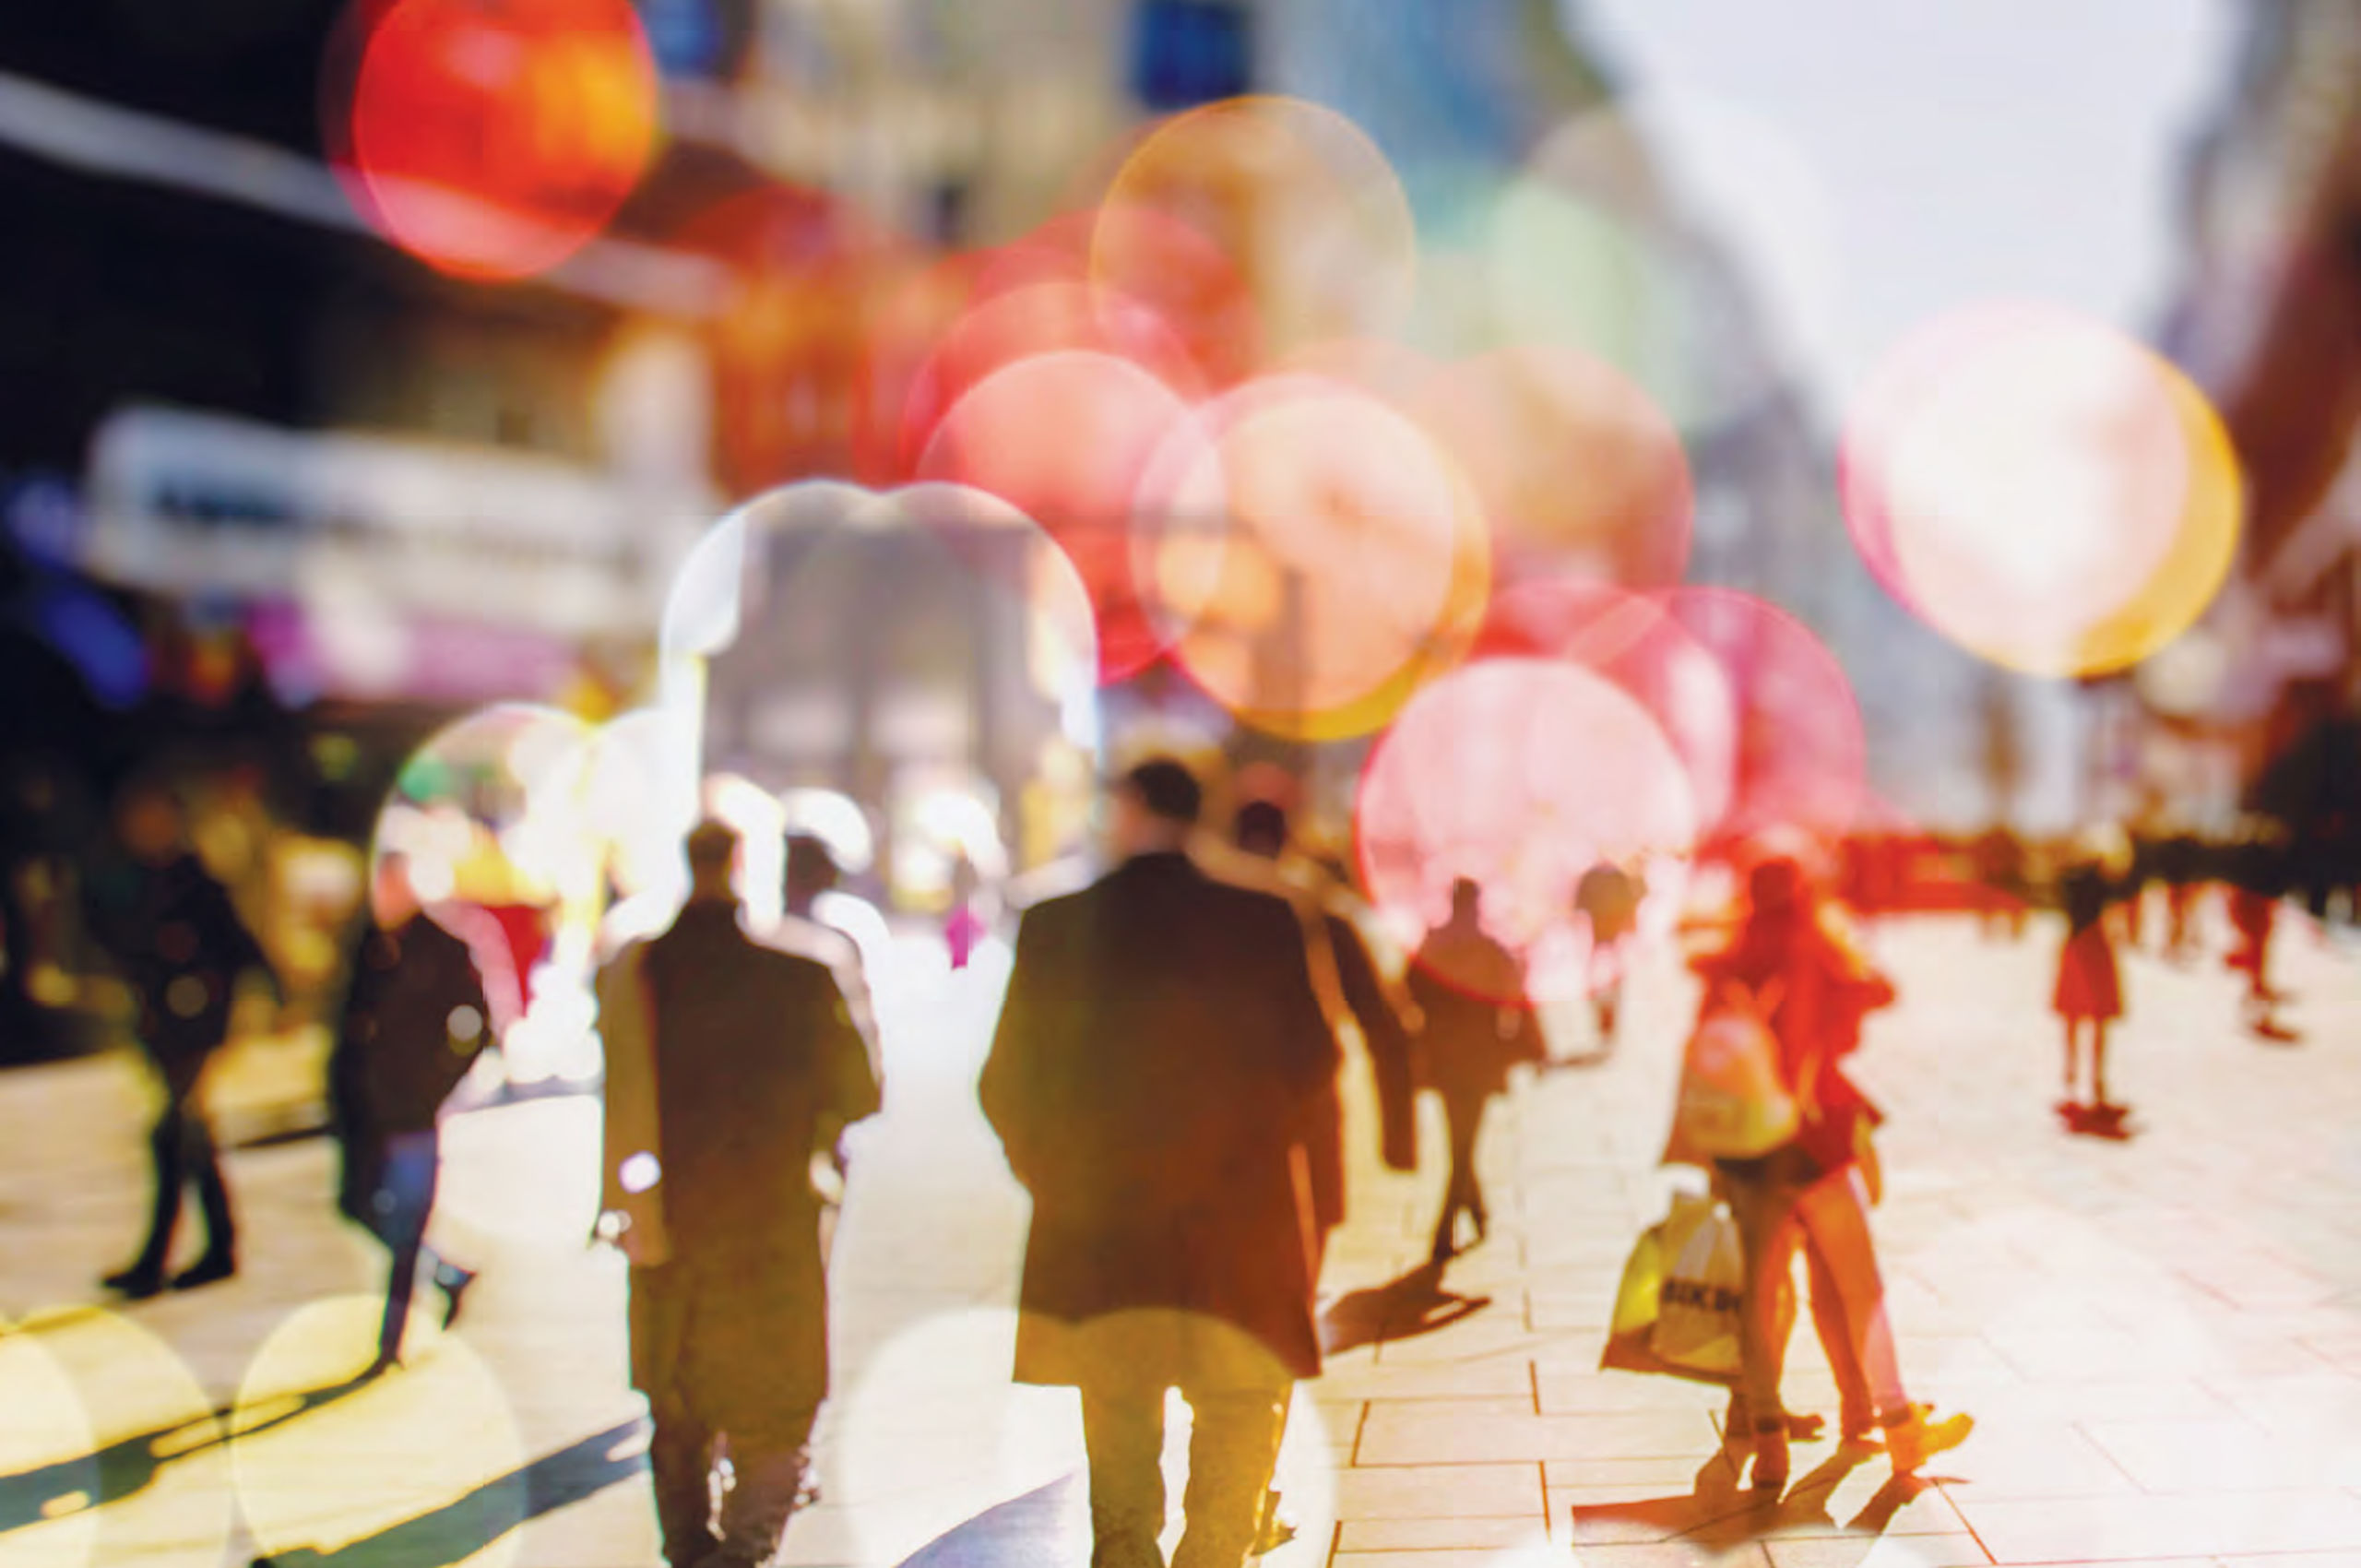 Partly blurred image of people walking in a paved public square with brightly coloured lens flare